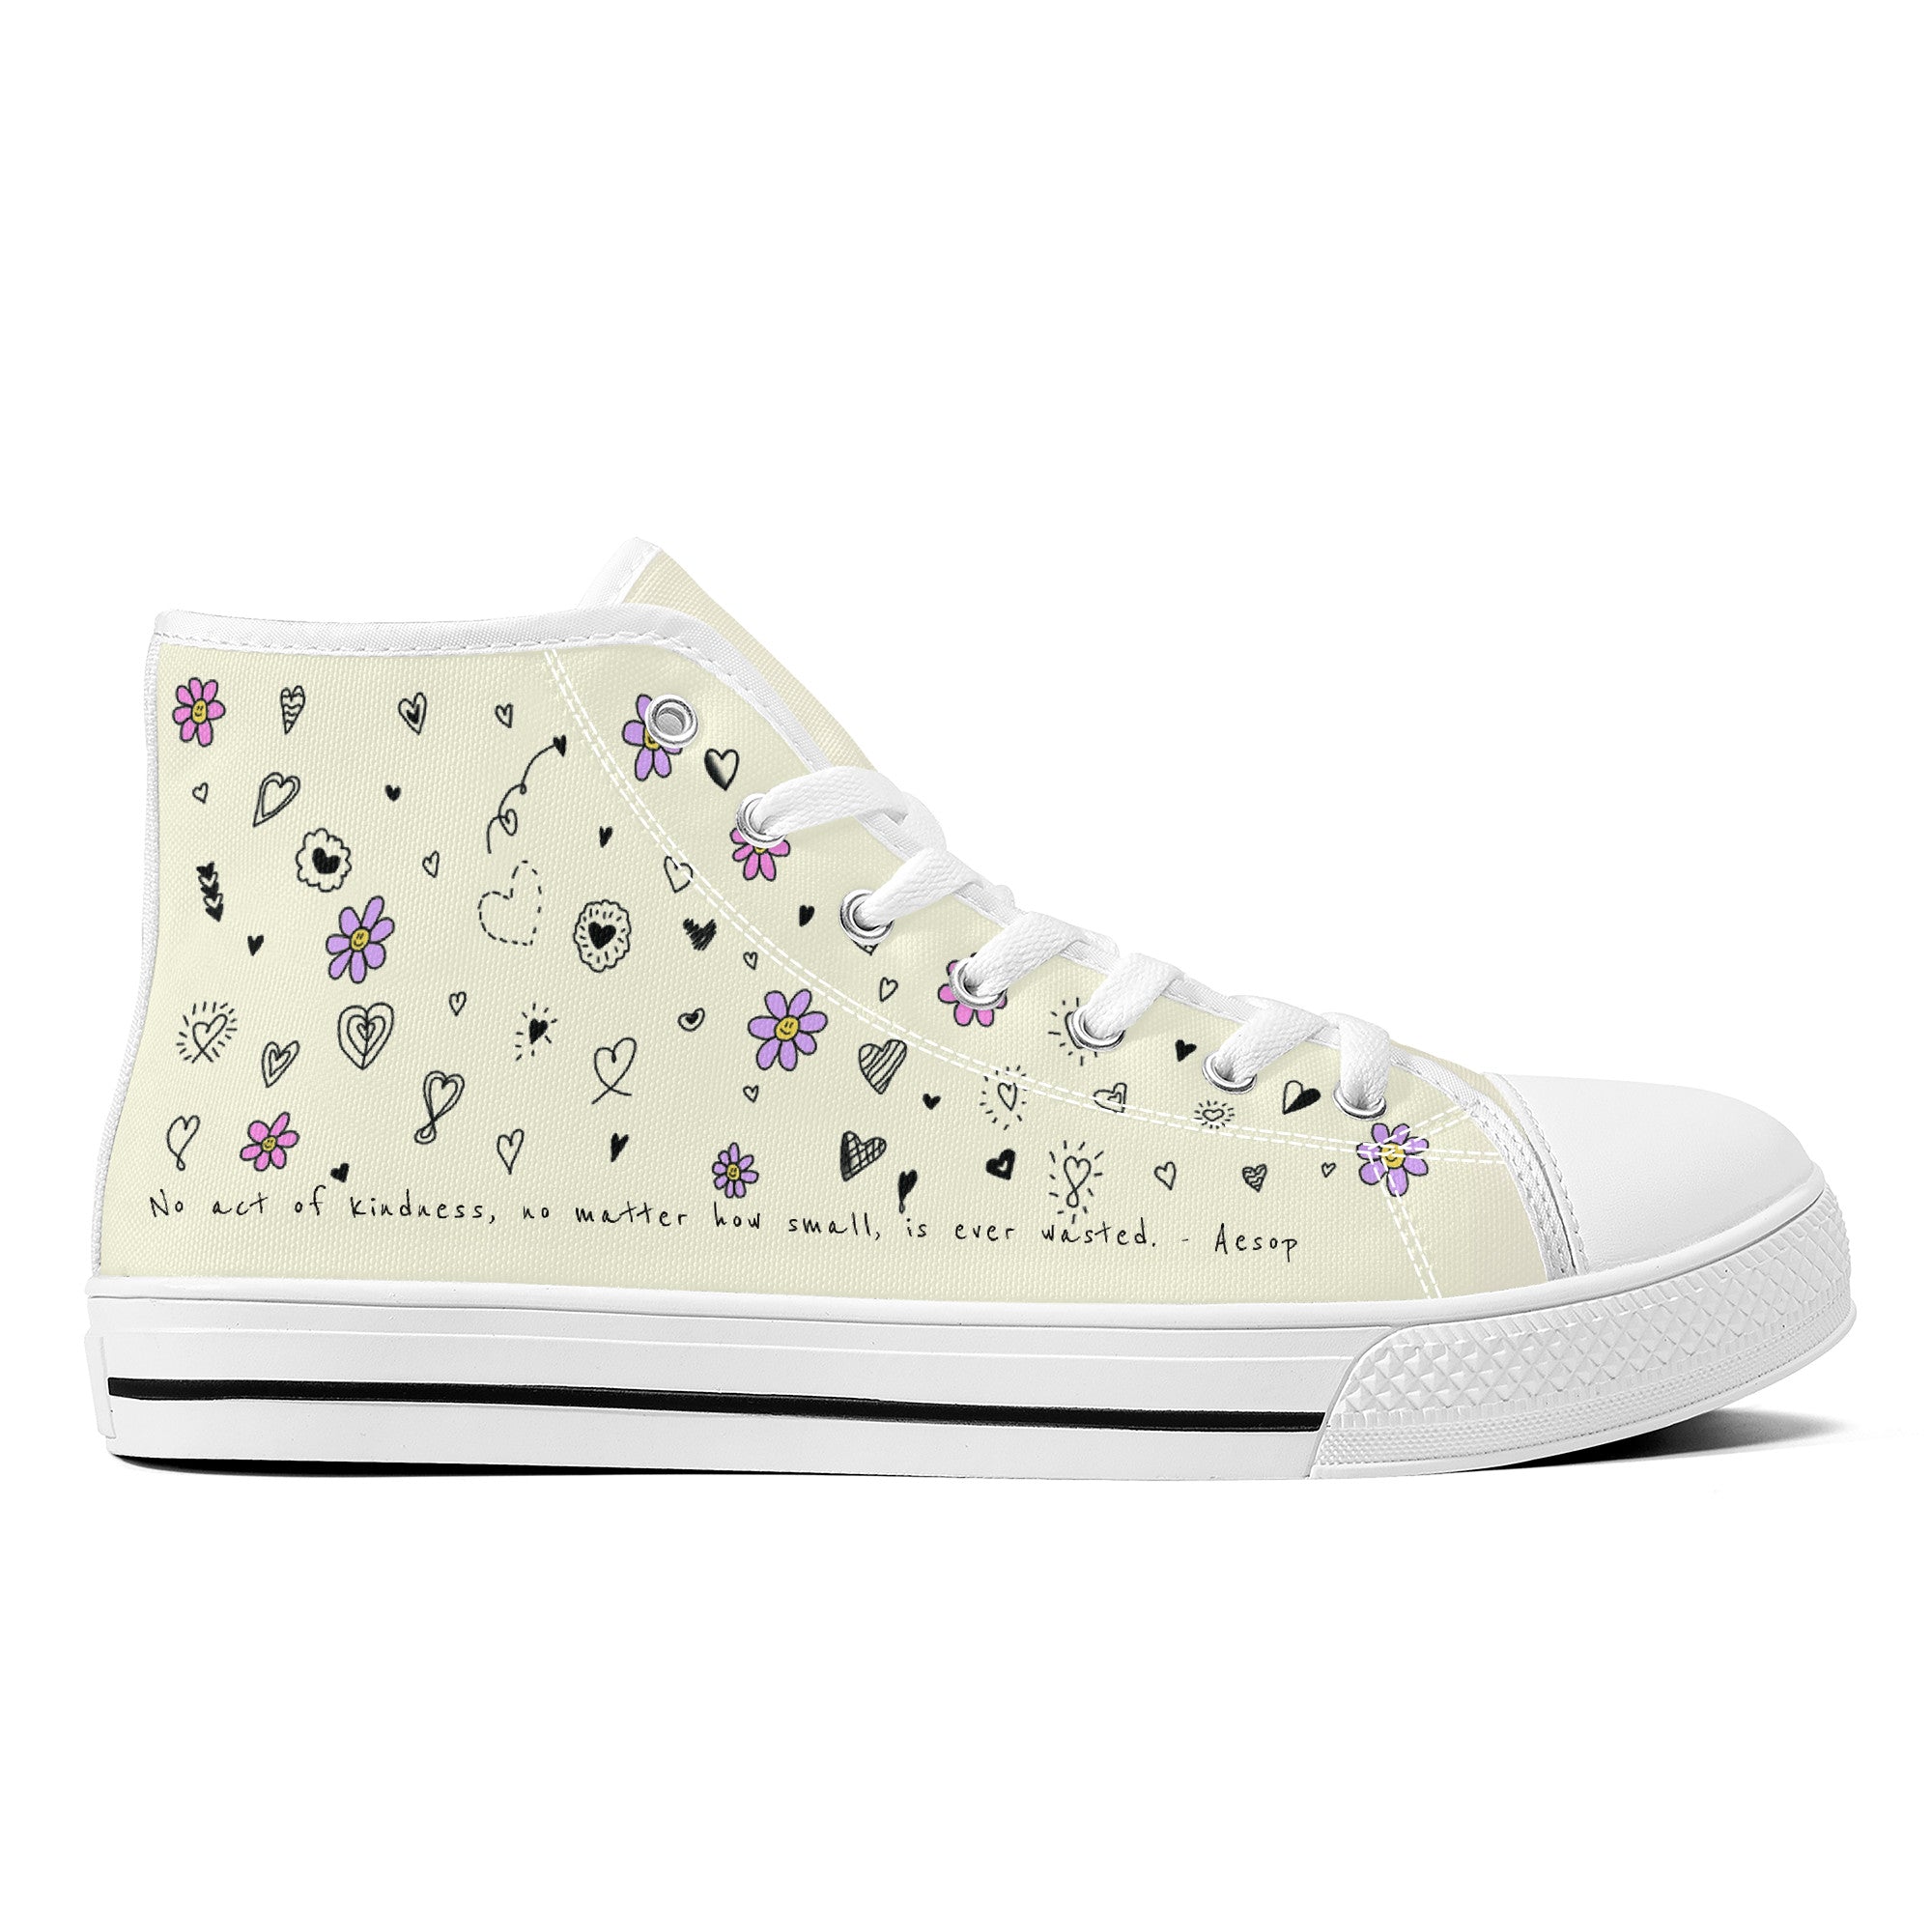 Cameron S Customized High-Top Canvas Shoes With Customized Tongue - White - Shoe Zero